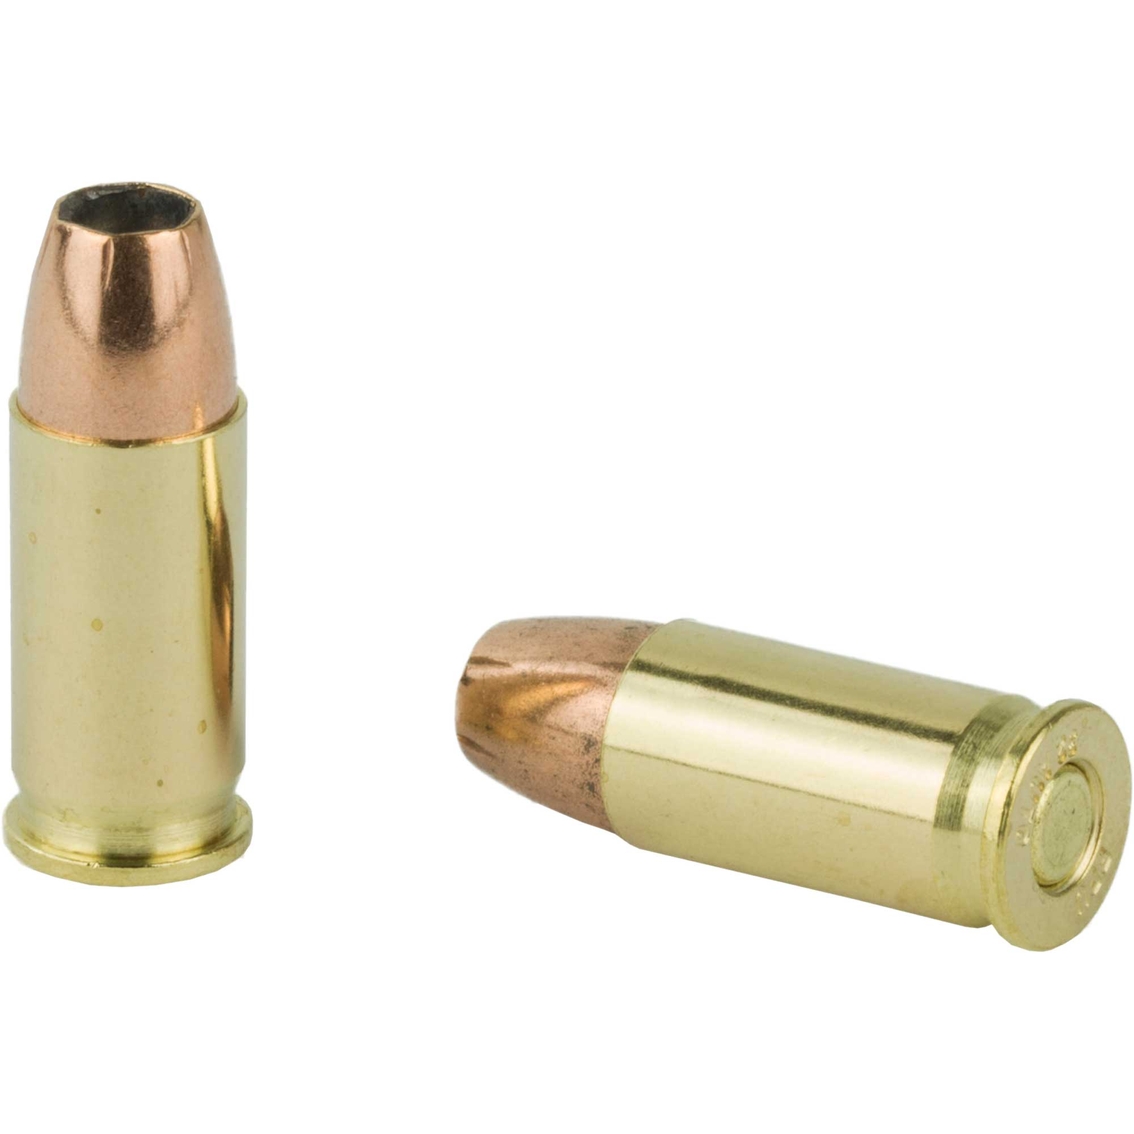 Prvi Partizan Defense 32 ACP 71 Gr. Jacketed Hollow Point 50 Rds - Image 2 of 4